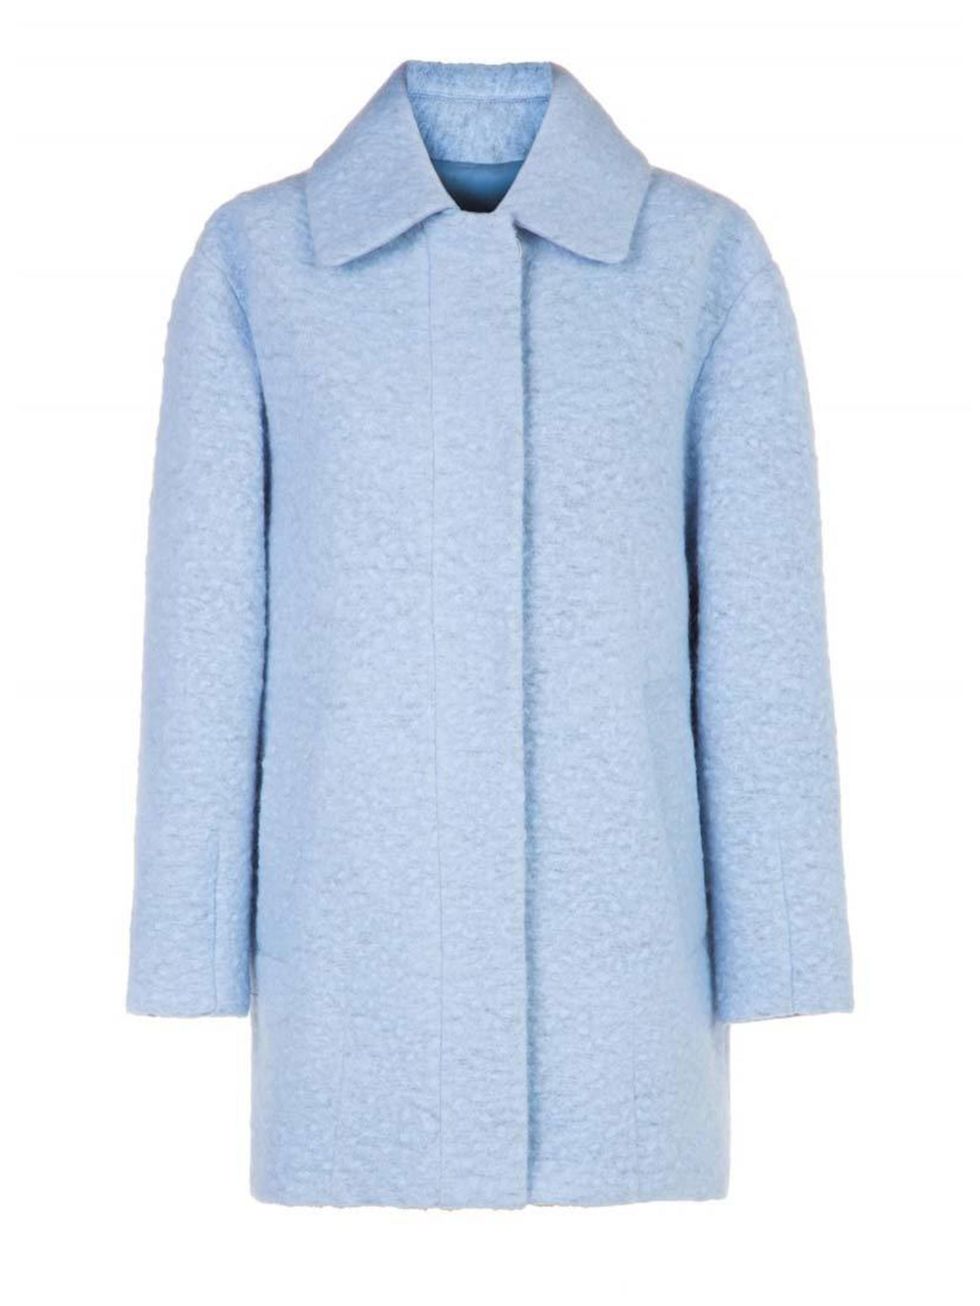 <p>Swap pale grey for ice blue (and hope the sky does the same).</p>

<p><a href="http://www.bimbaylola.com/shoponline/product.php?id_product=11166&id_category=722" target="_blank">Bimba y Lola</a> coat, £300</p>